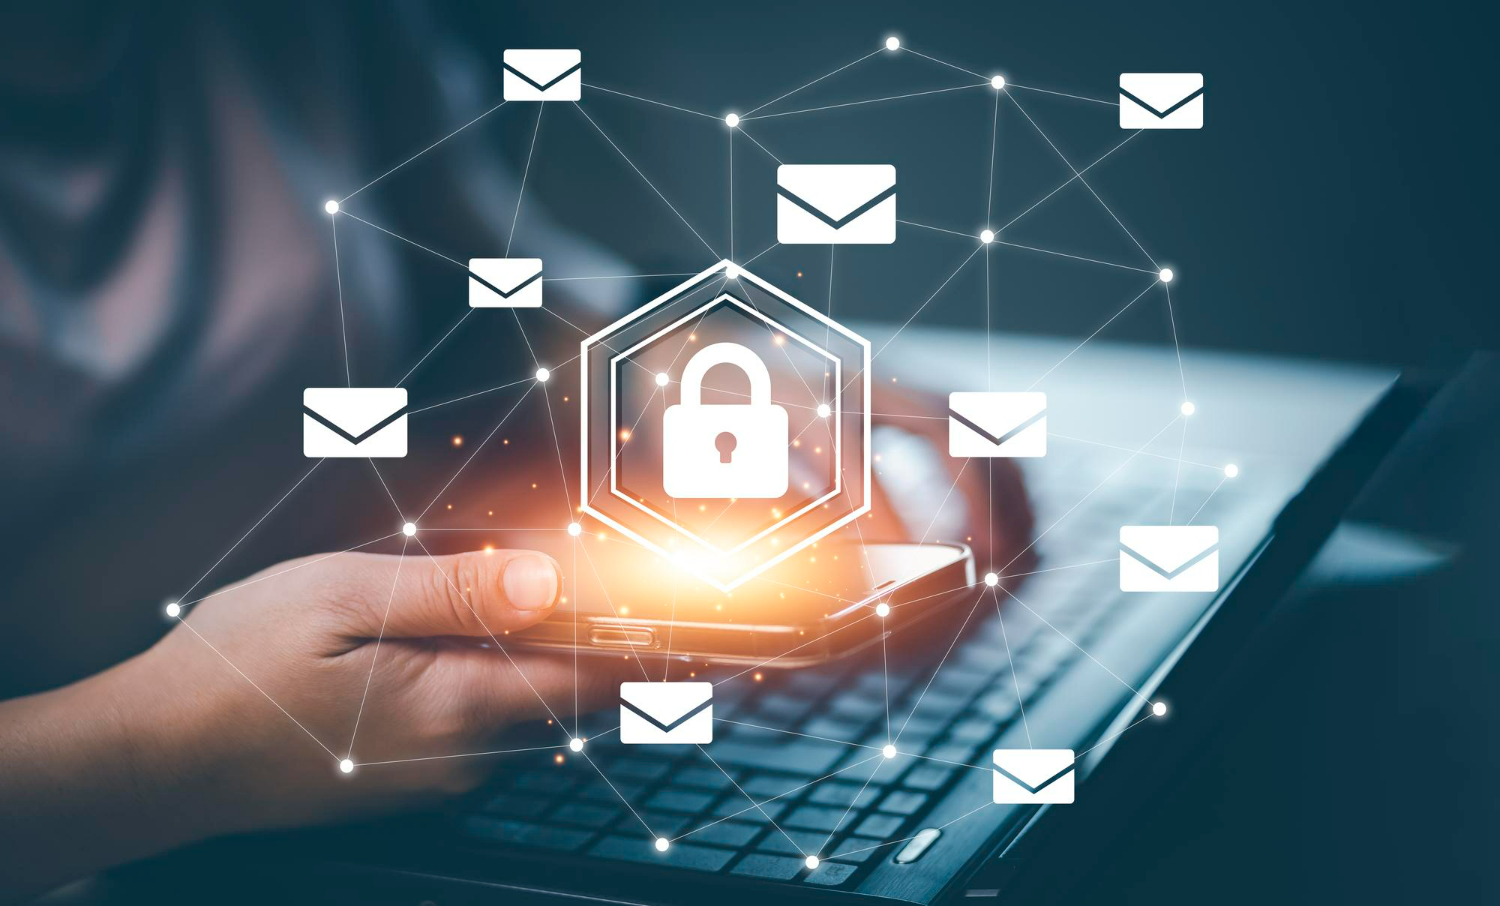 New report reveals that 94% of global organizations have experienced email security incidents last year